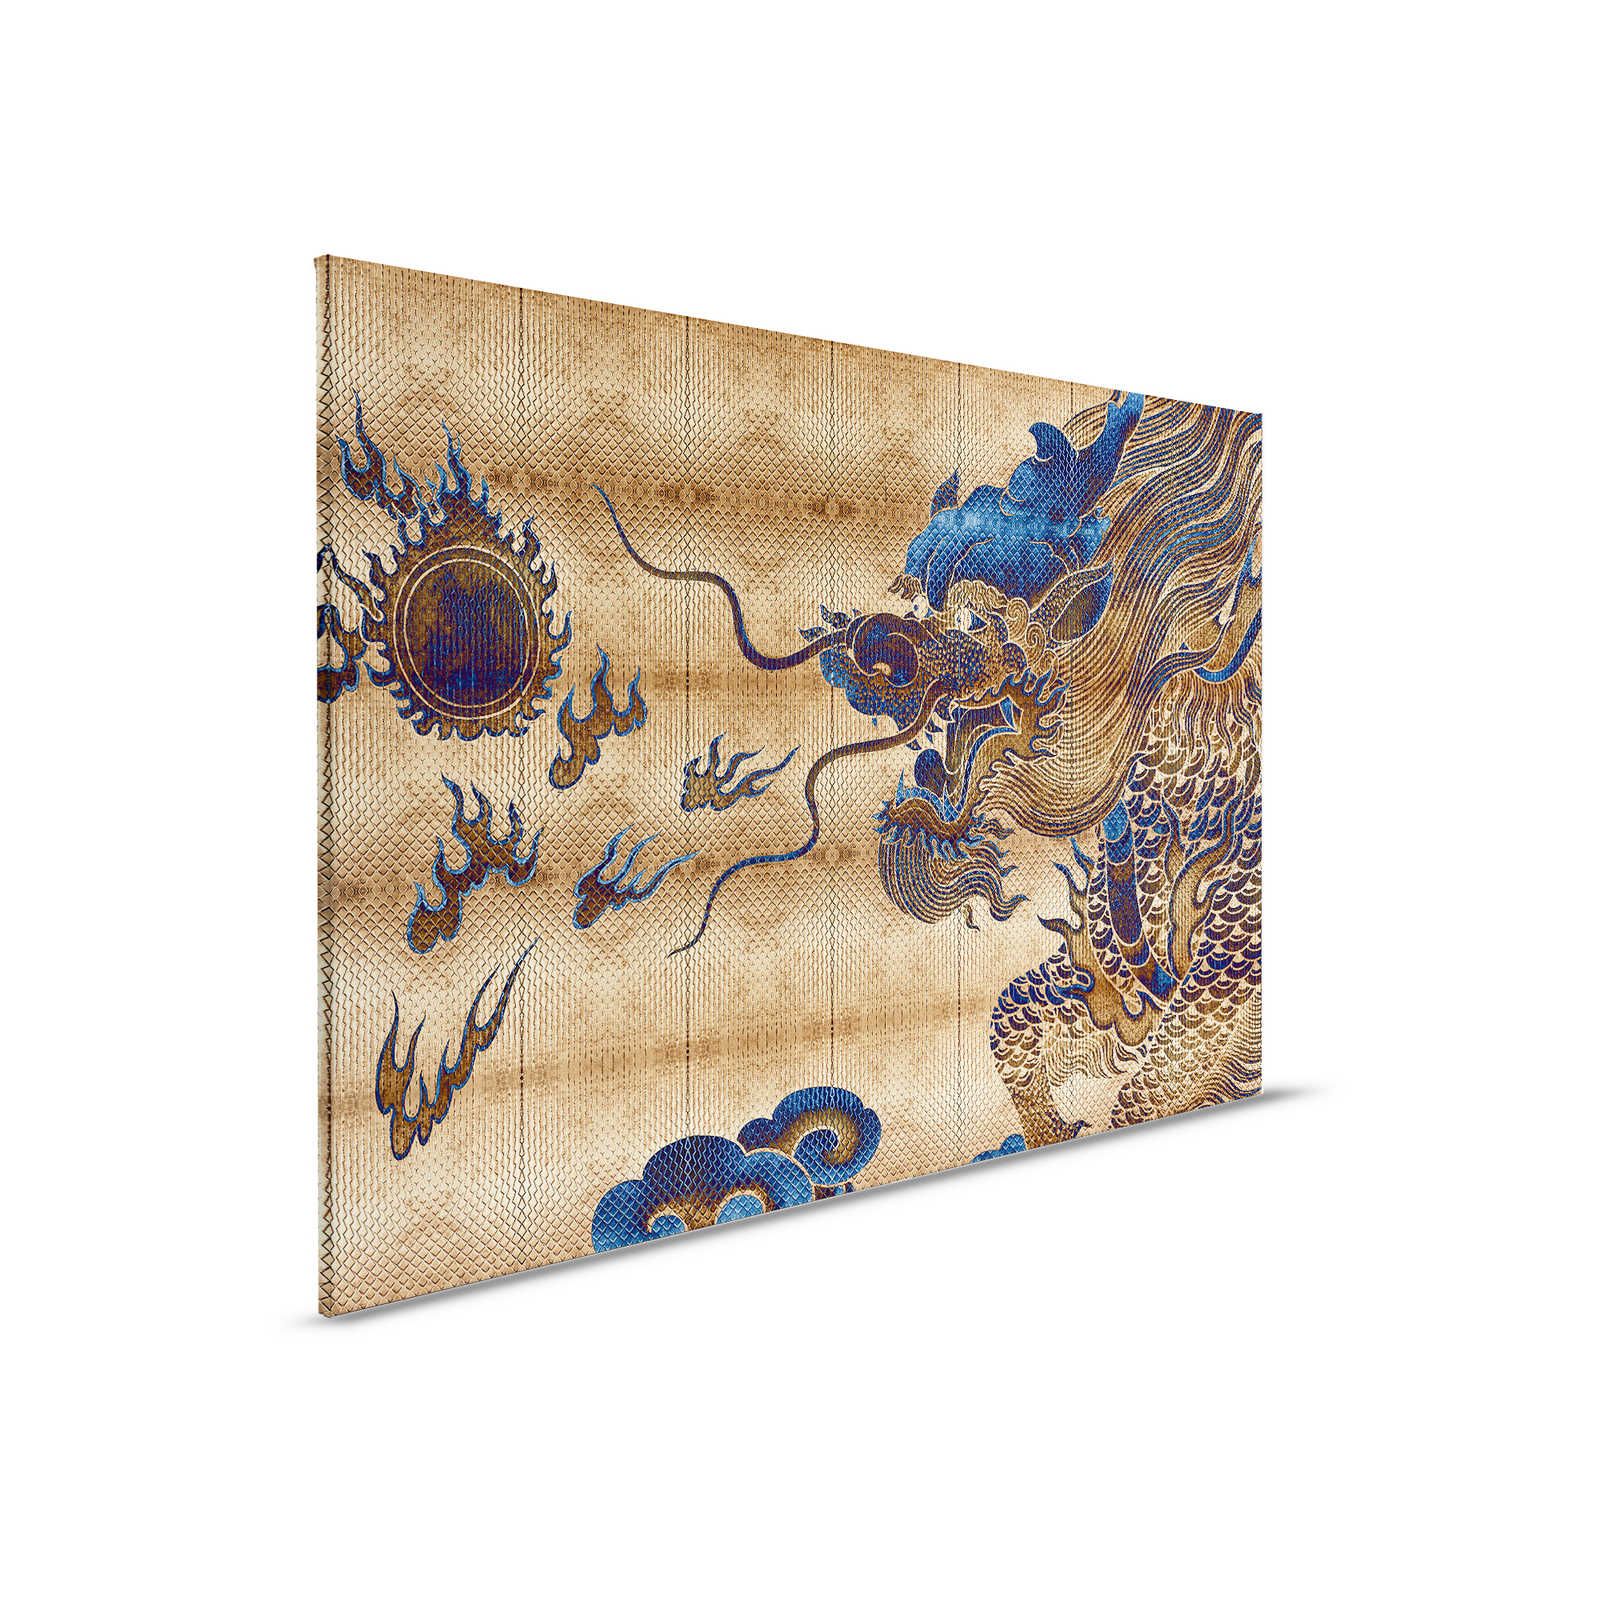 Shenzen 2 - Canvas painting Gold Dragon in Asian Syle - 0,90 m x 0,60 m
